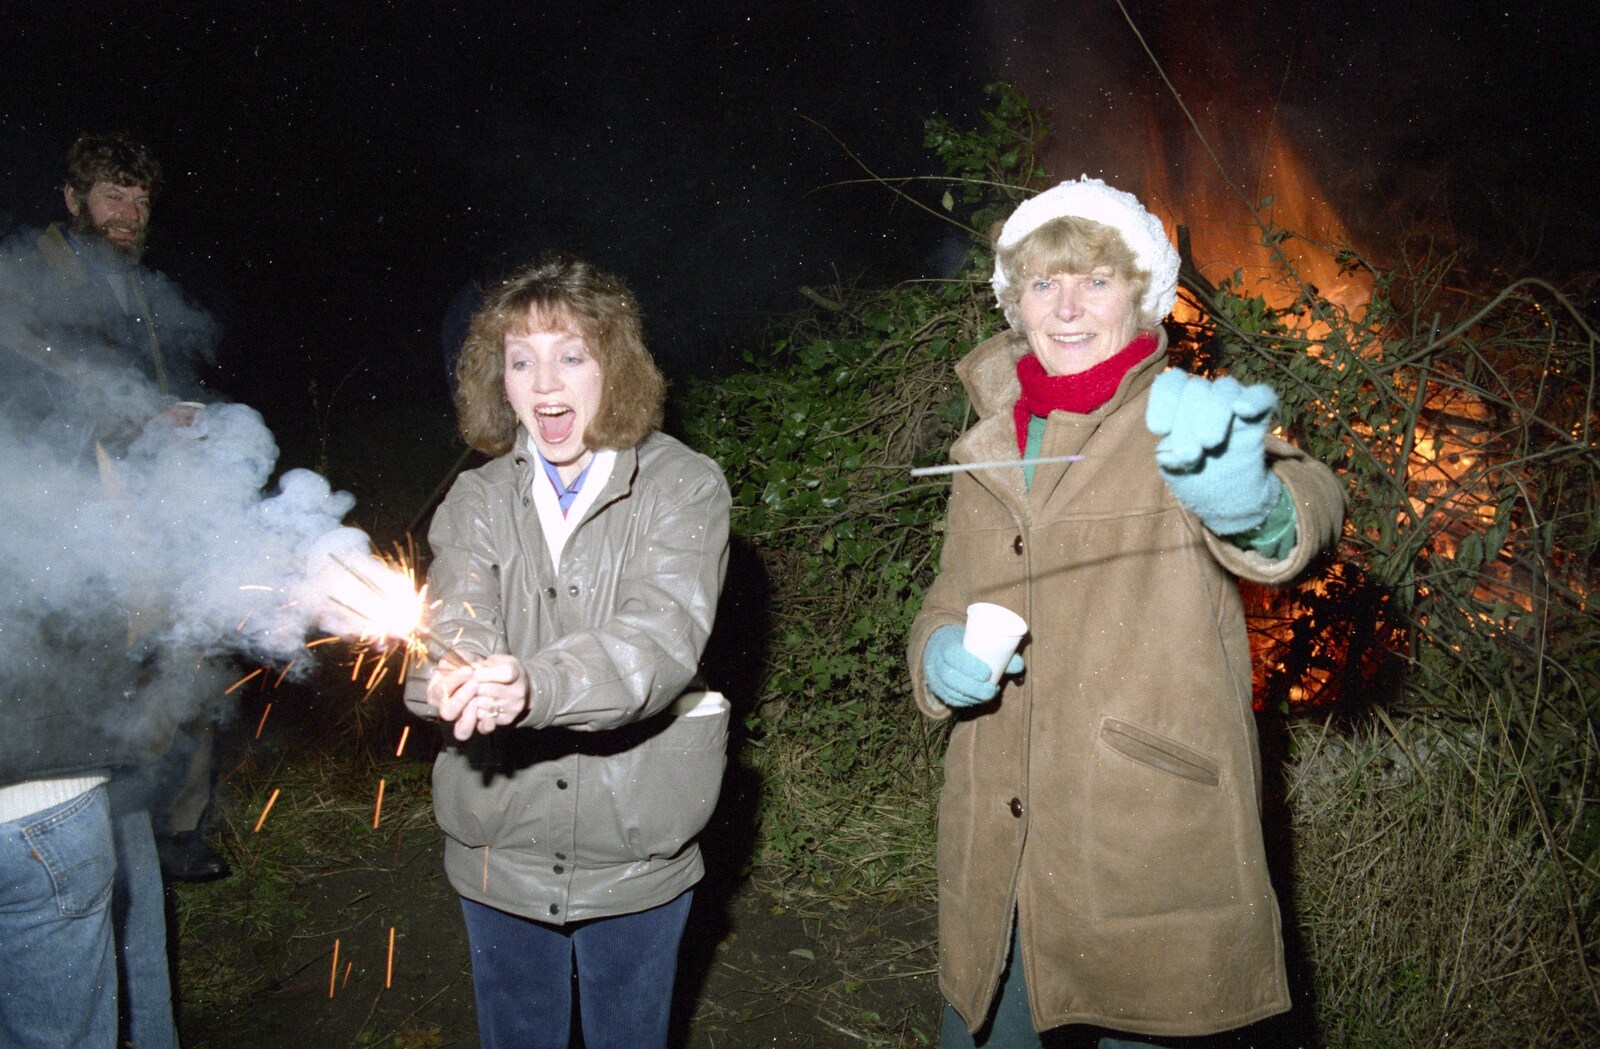 Monique shrieks as her sparkler goes off from Bonfire Night and Printec at the Stoke Ash White Horse, Suffolk - 5th November 1991